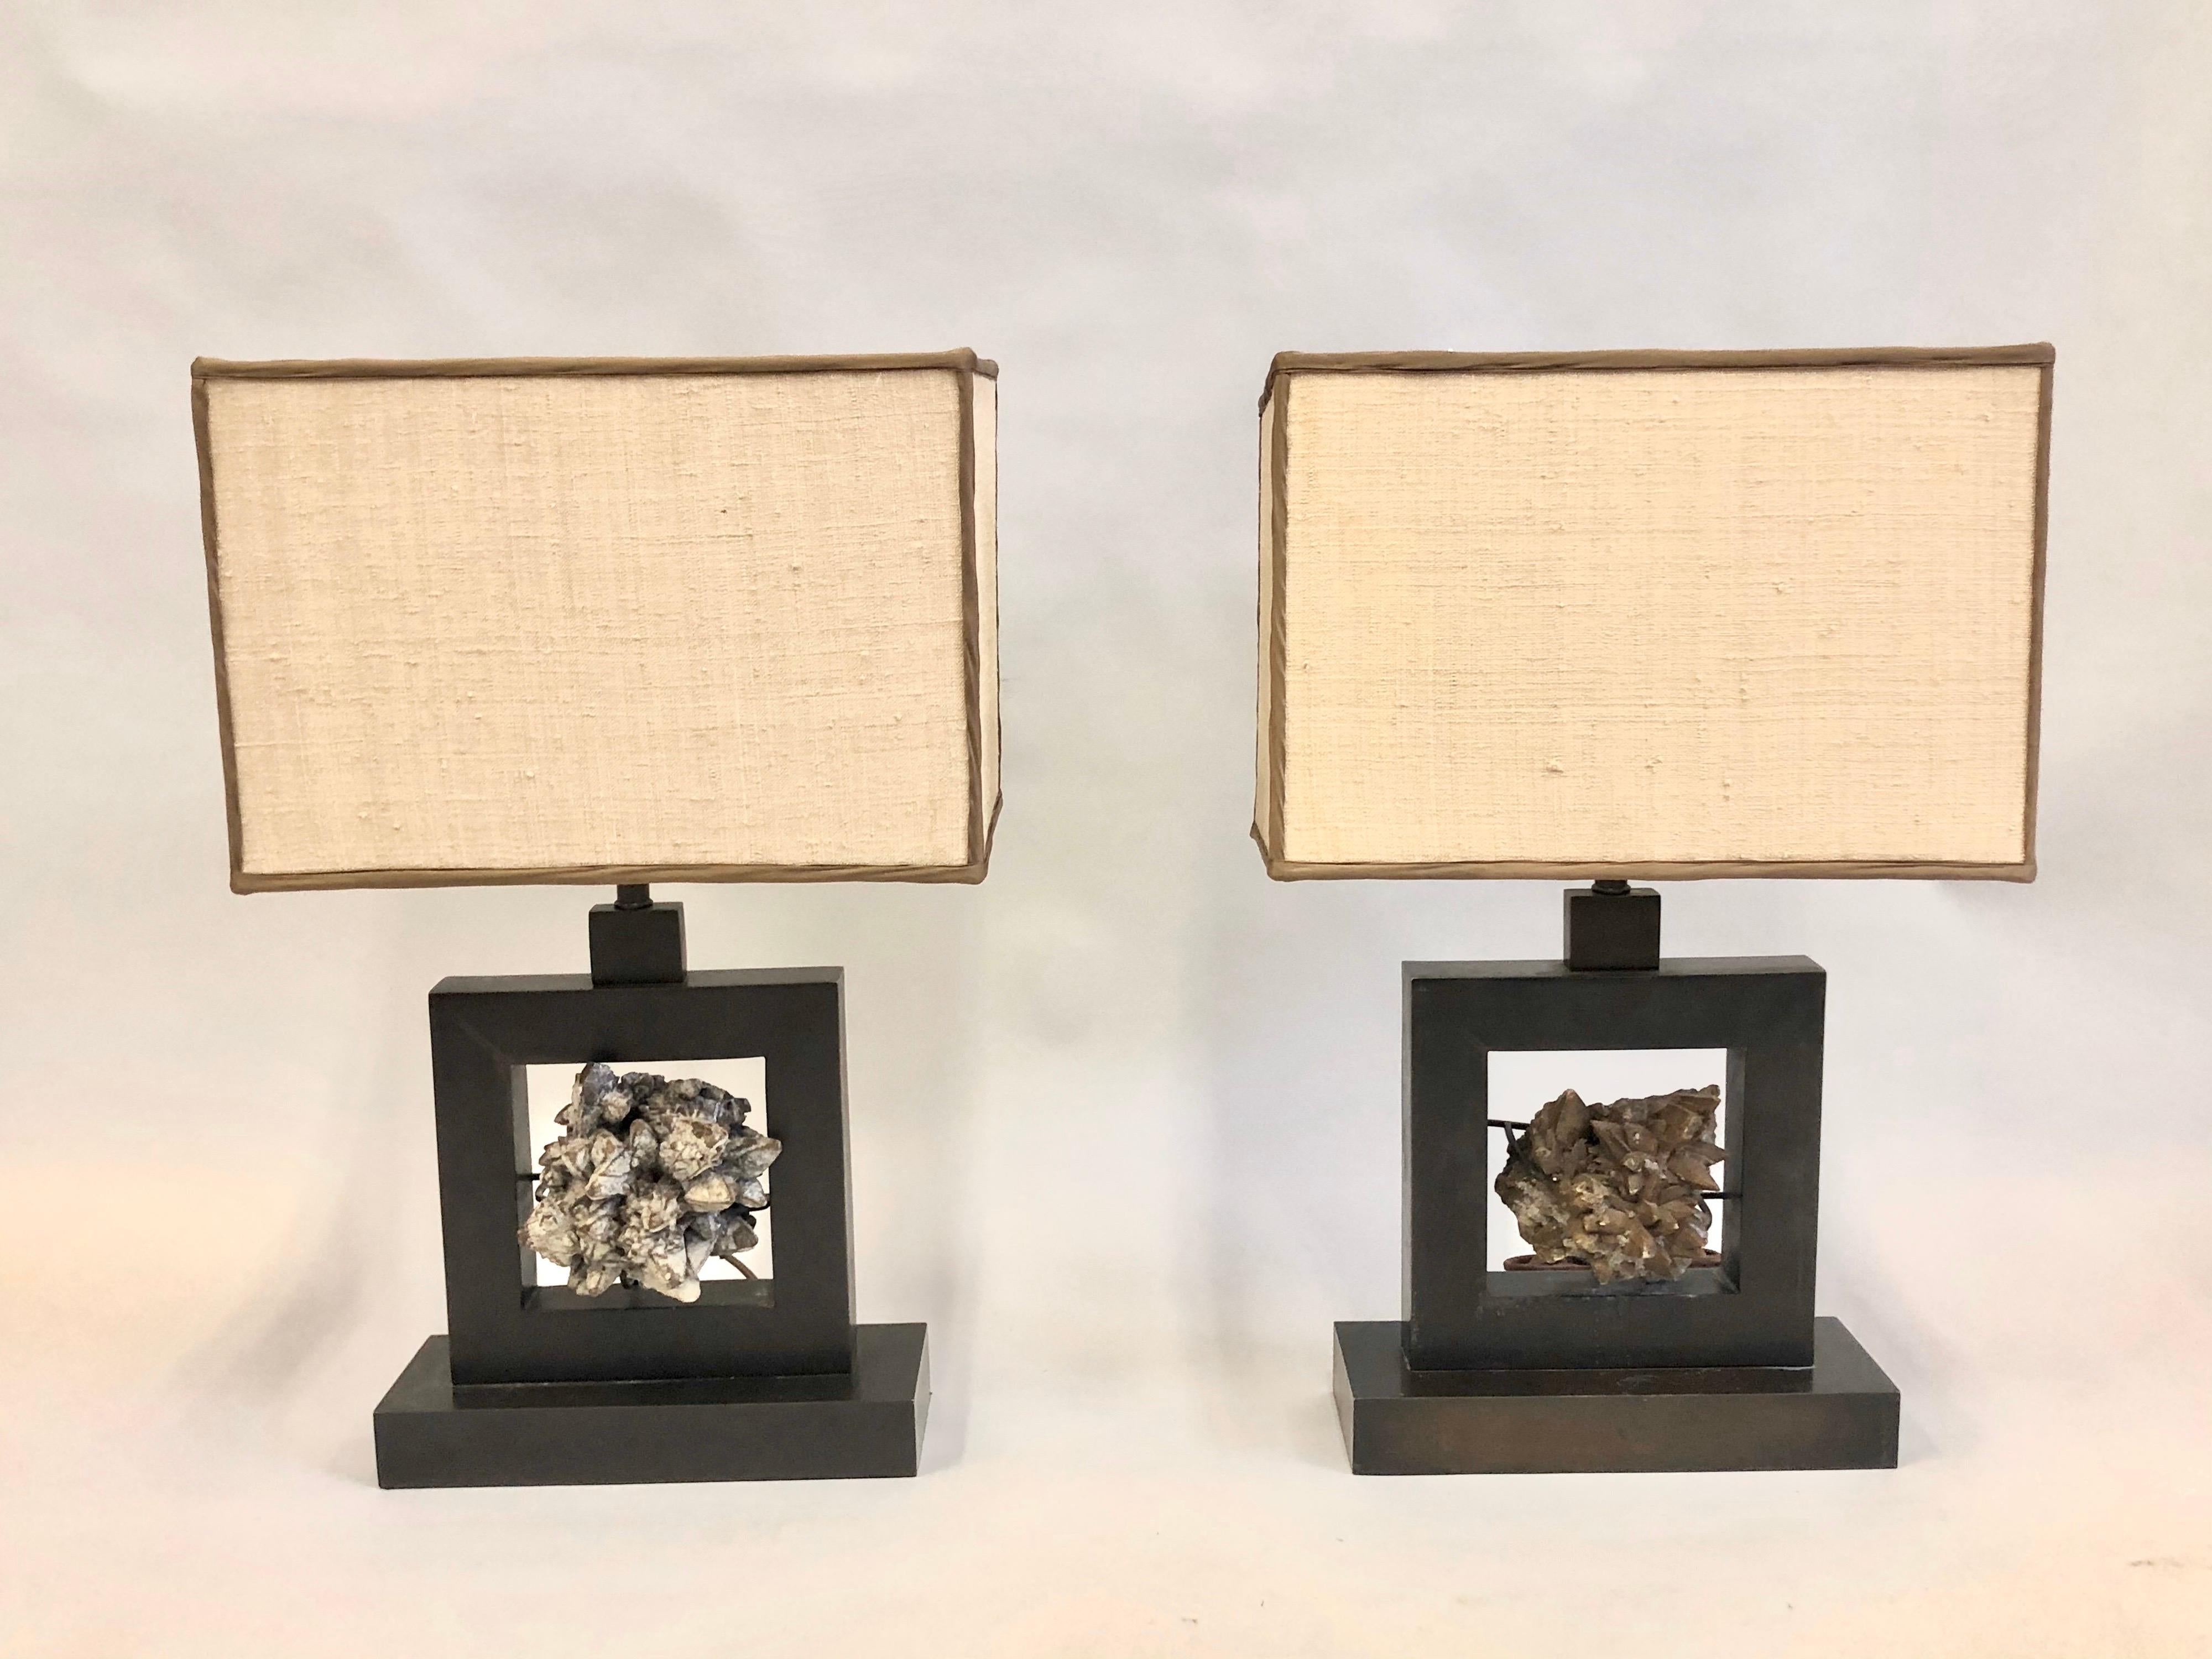 Elegant, rare and timeless pair of mineral crystal geode table by the renowned French mid-20th century interior designer and architect, Marc Duplantier. The raw rock crystal is delicately set in sober, handmade, bronzed wrought iron table lamp bases